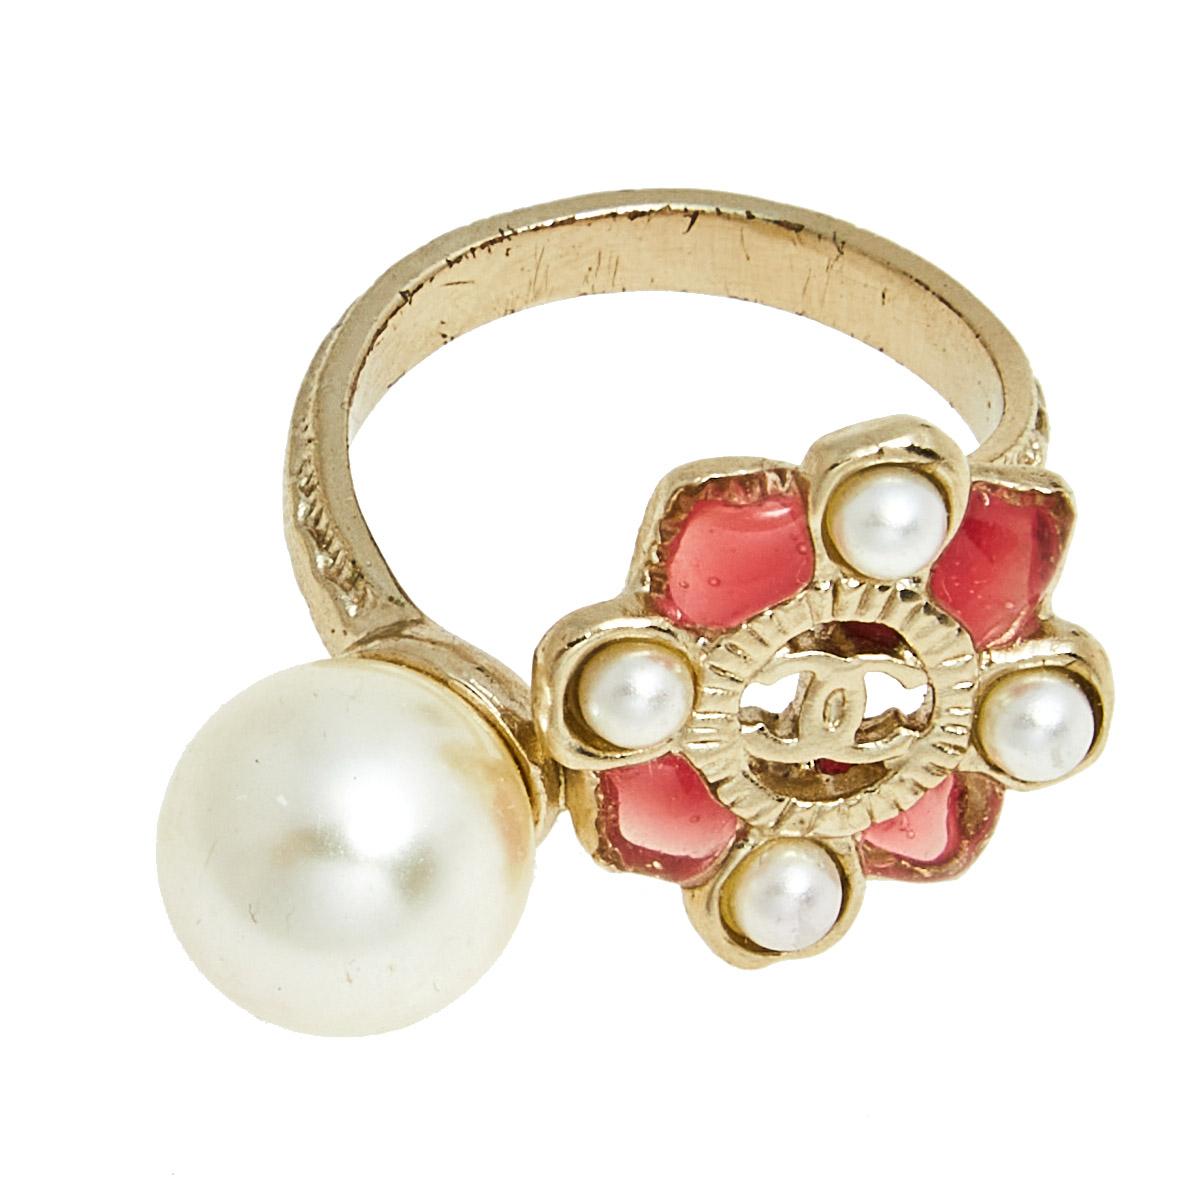 Contemporary Chanel Pink Gripoix Pearl Gold Tone Floral Cocktail Ring Size EU 54